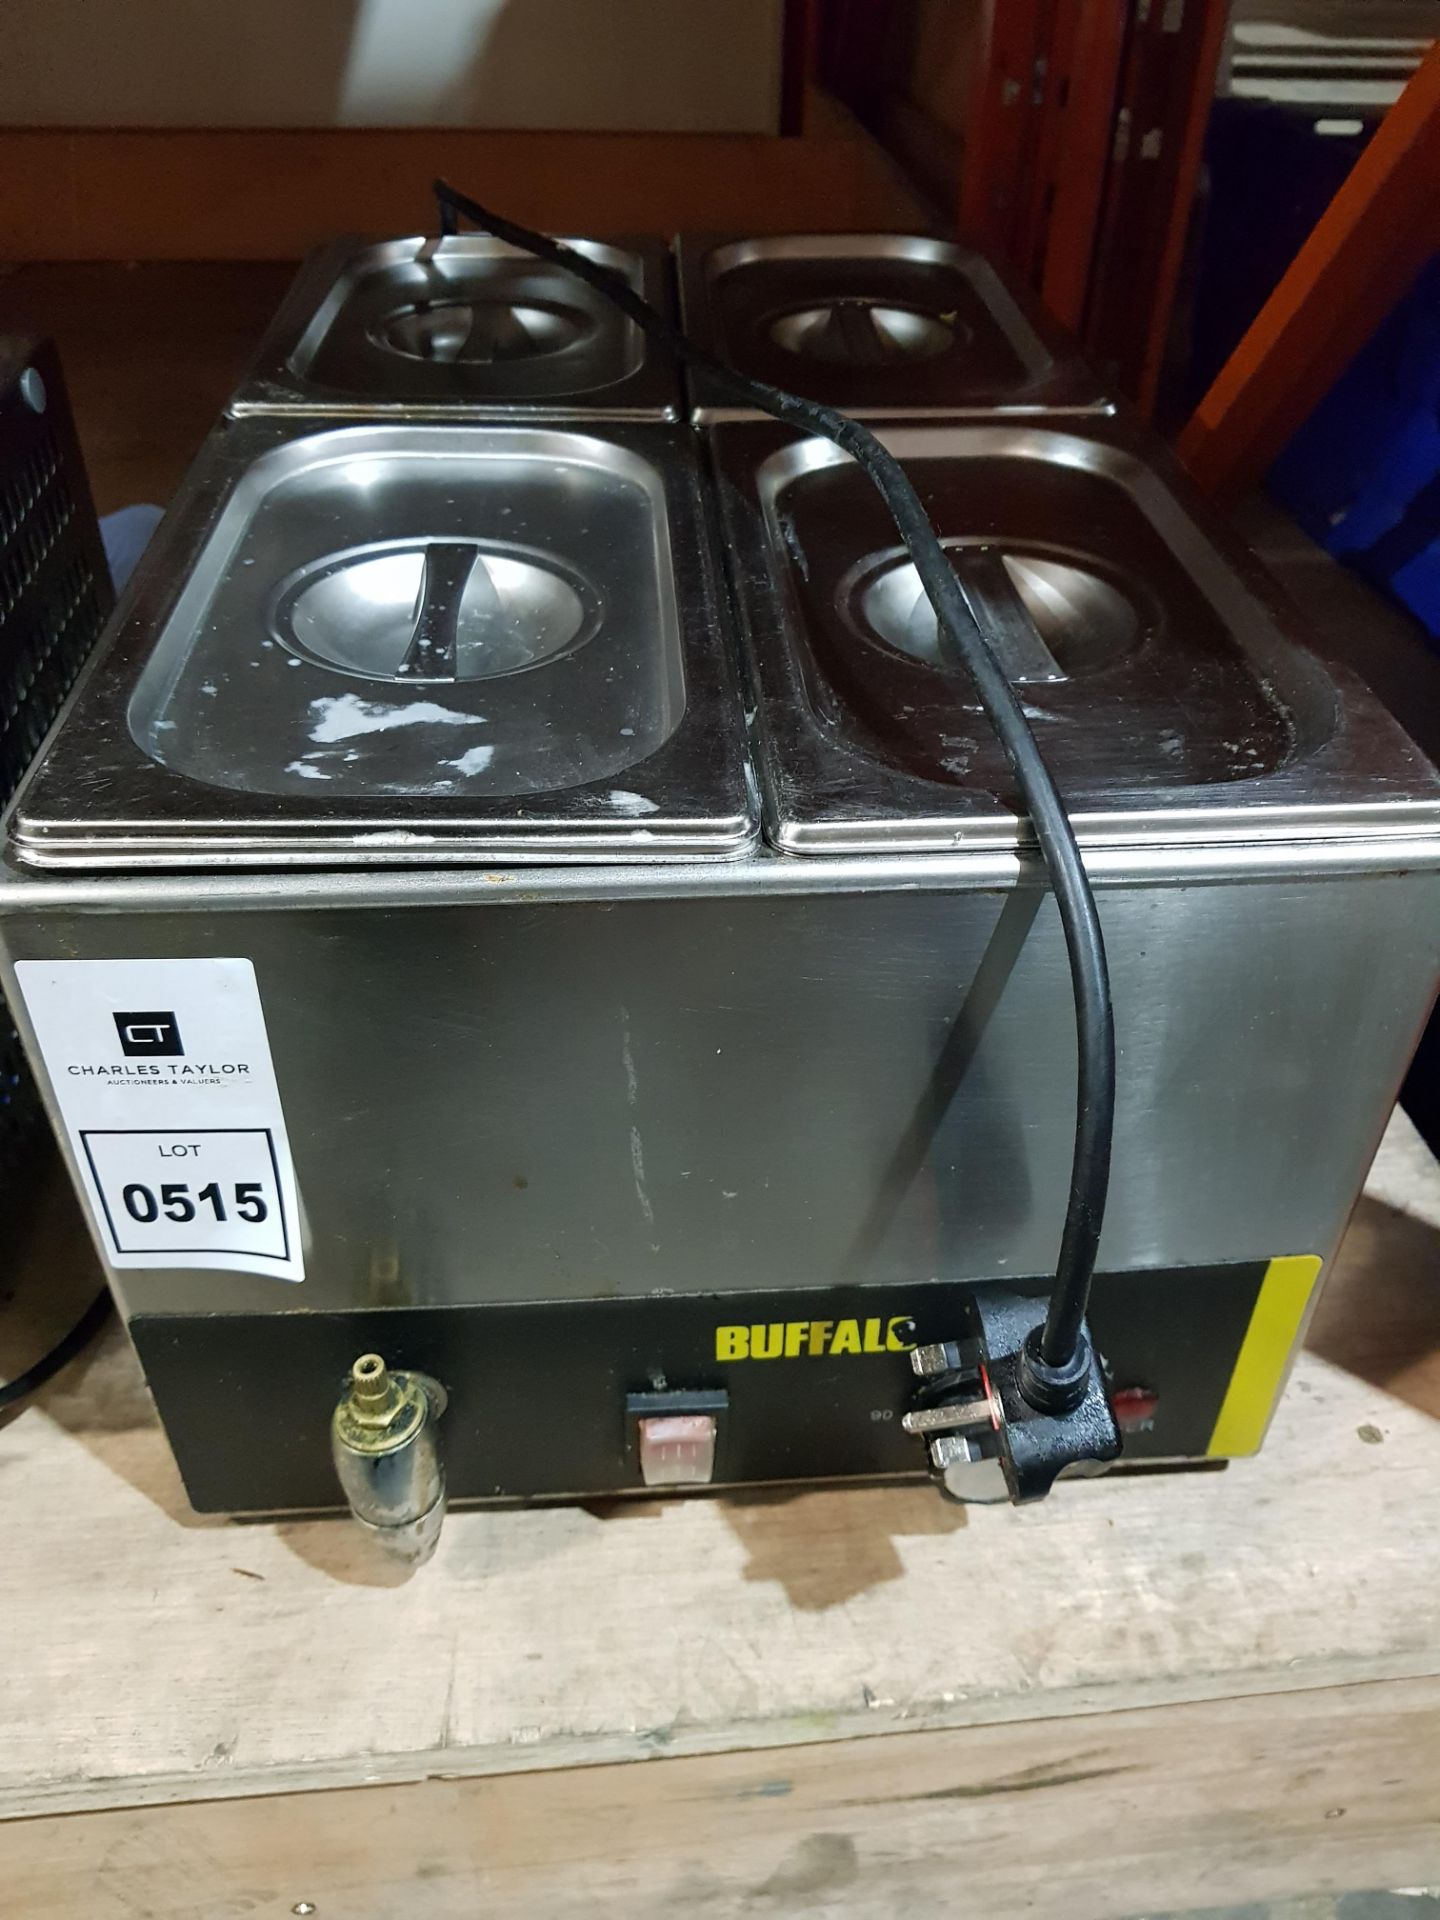 1 X BUFFALO 220-240V FOOD WARMER WITH 4 PANS WITH LIDZ